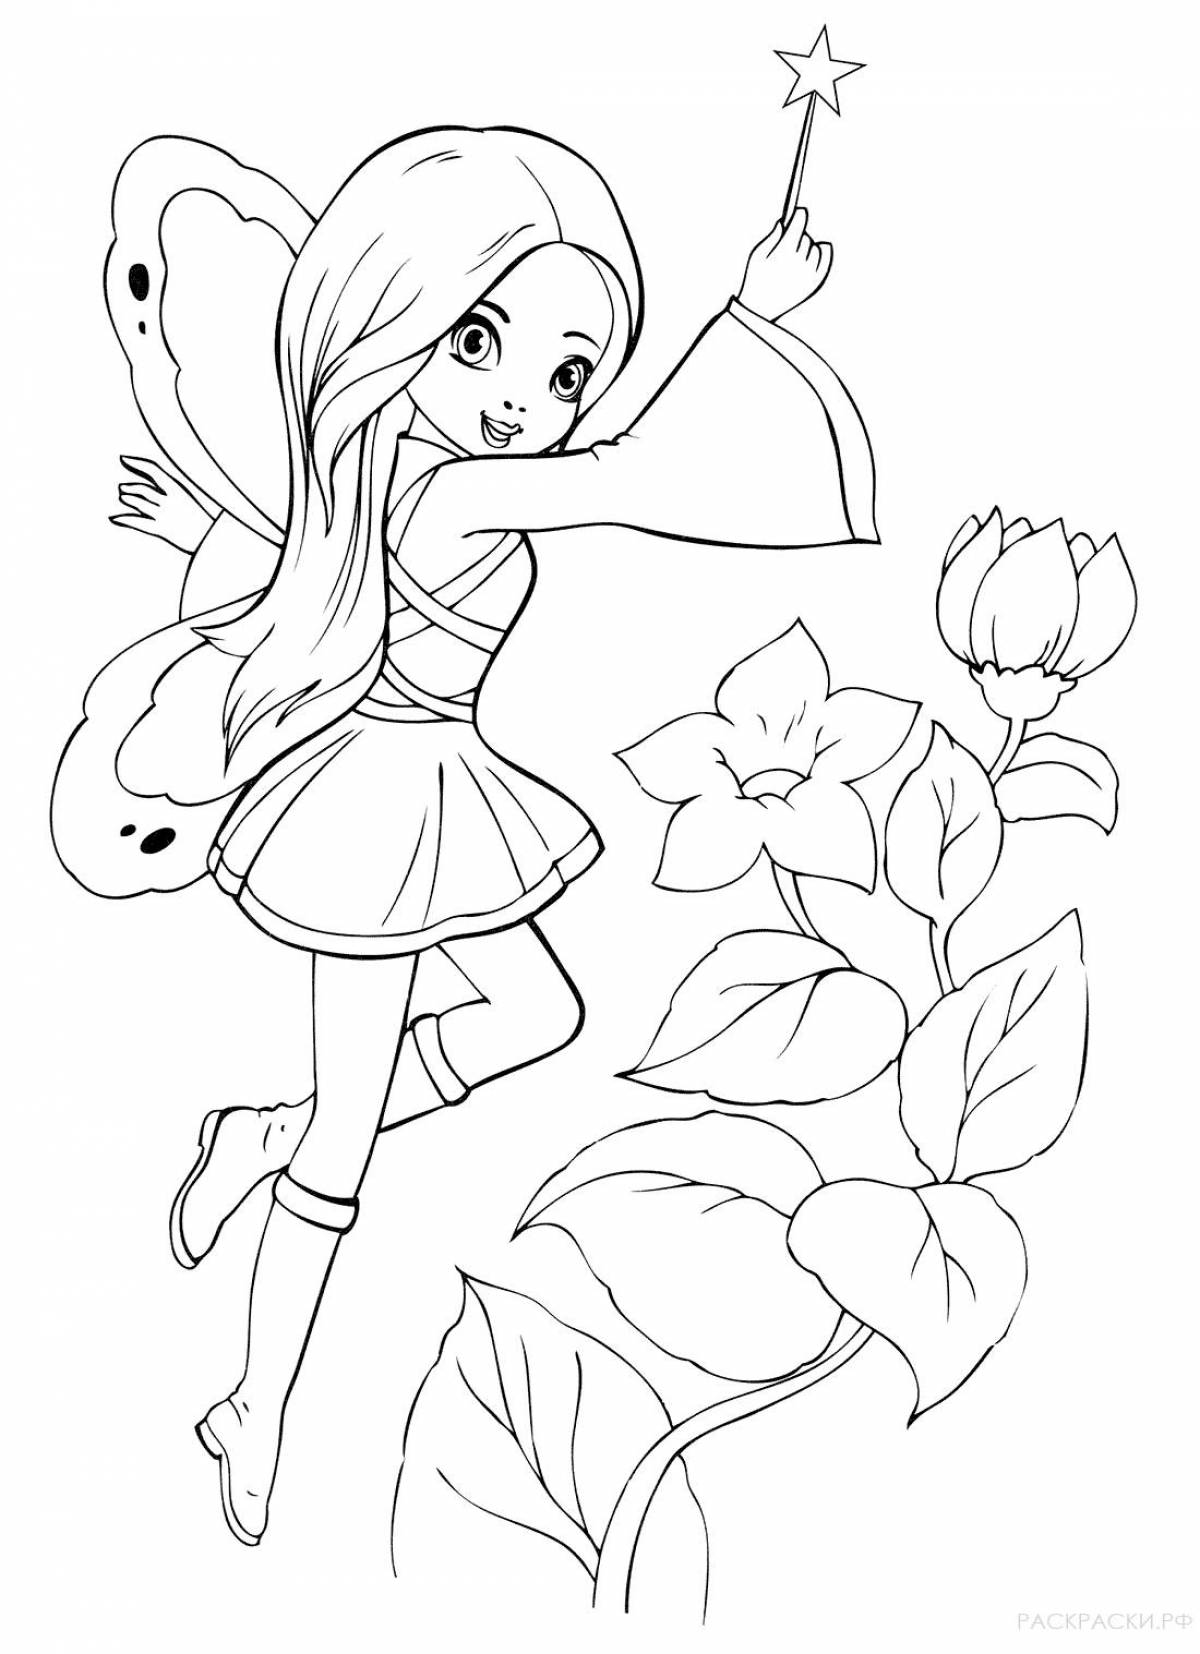 Joyful coloring for girls 6-7 years old